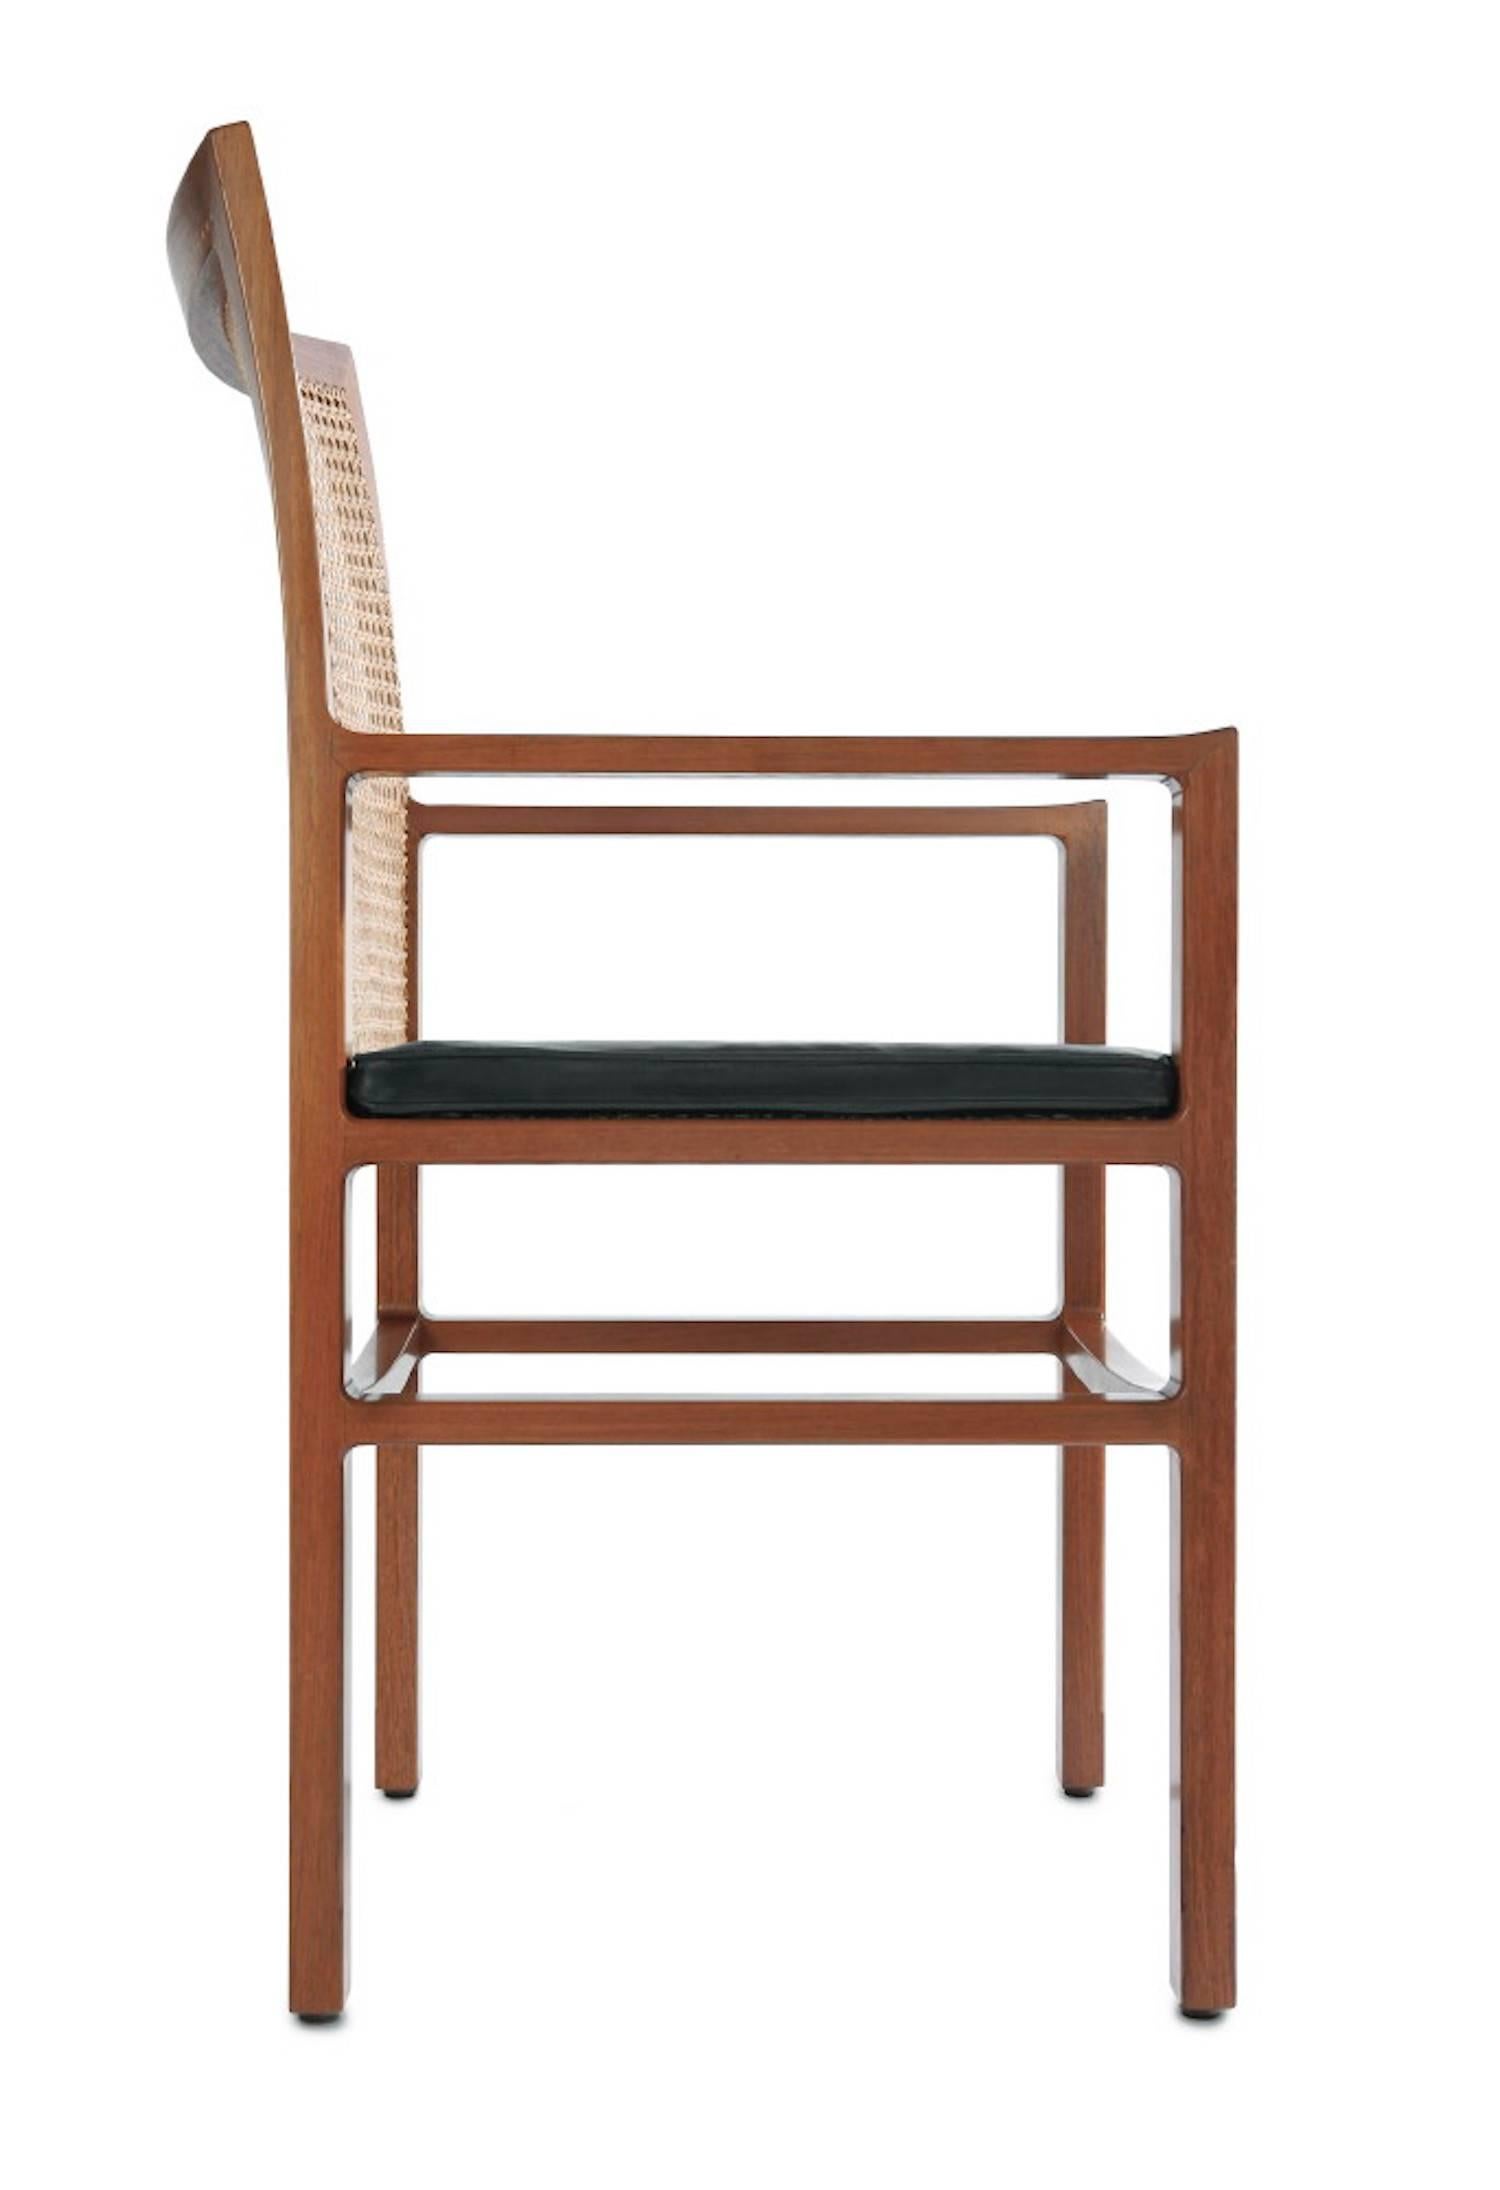 Armchair of mahogany with black leather seat, back of woven cane. Designed in 1965, manufactured by Michael Bloch.